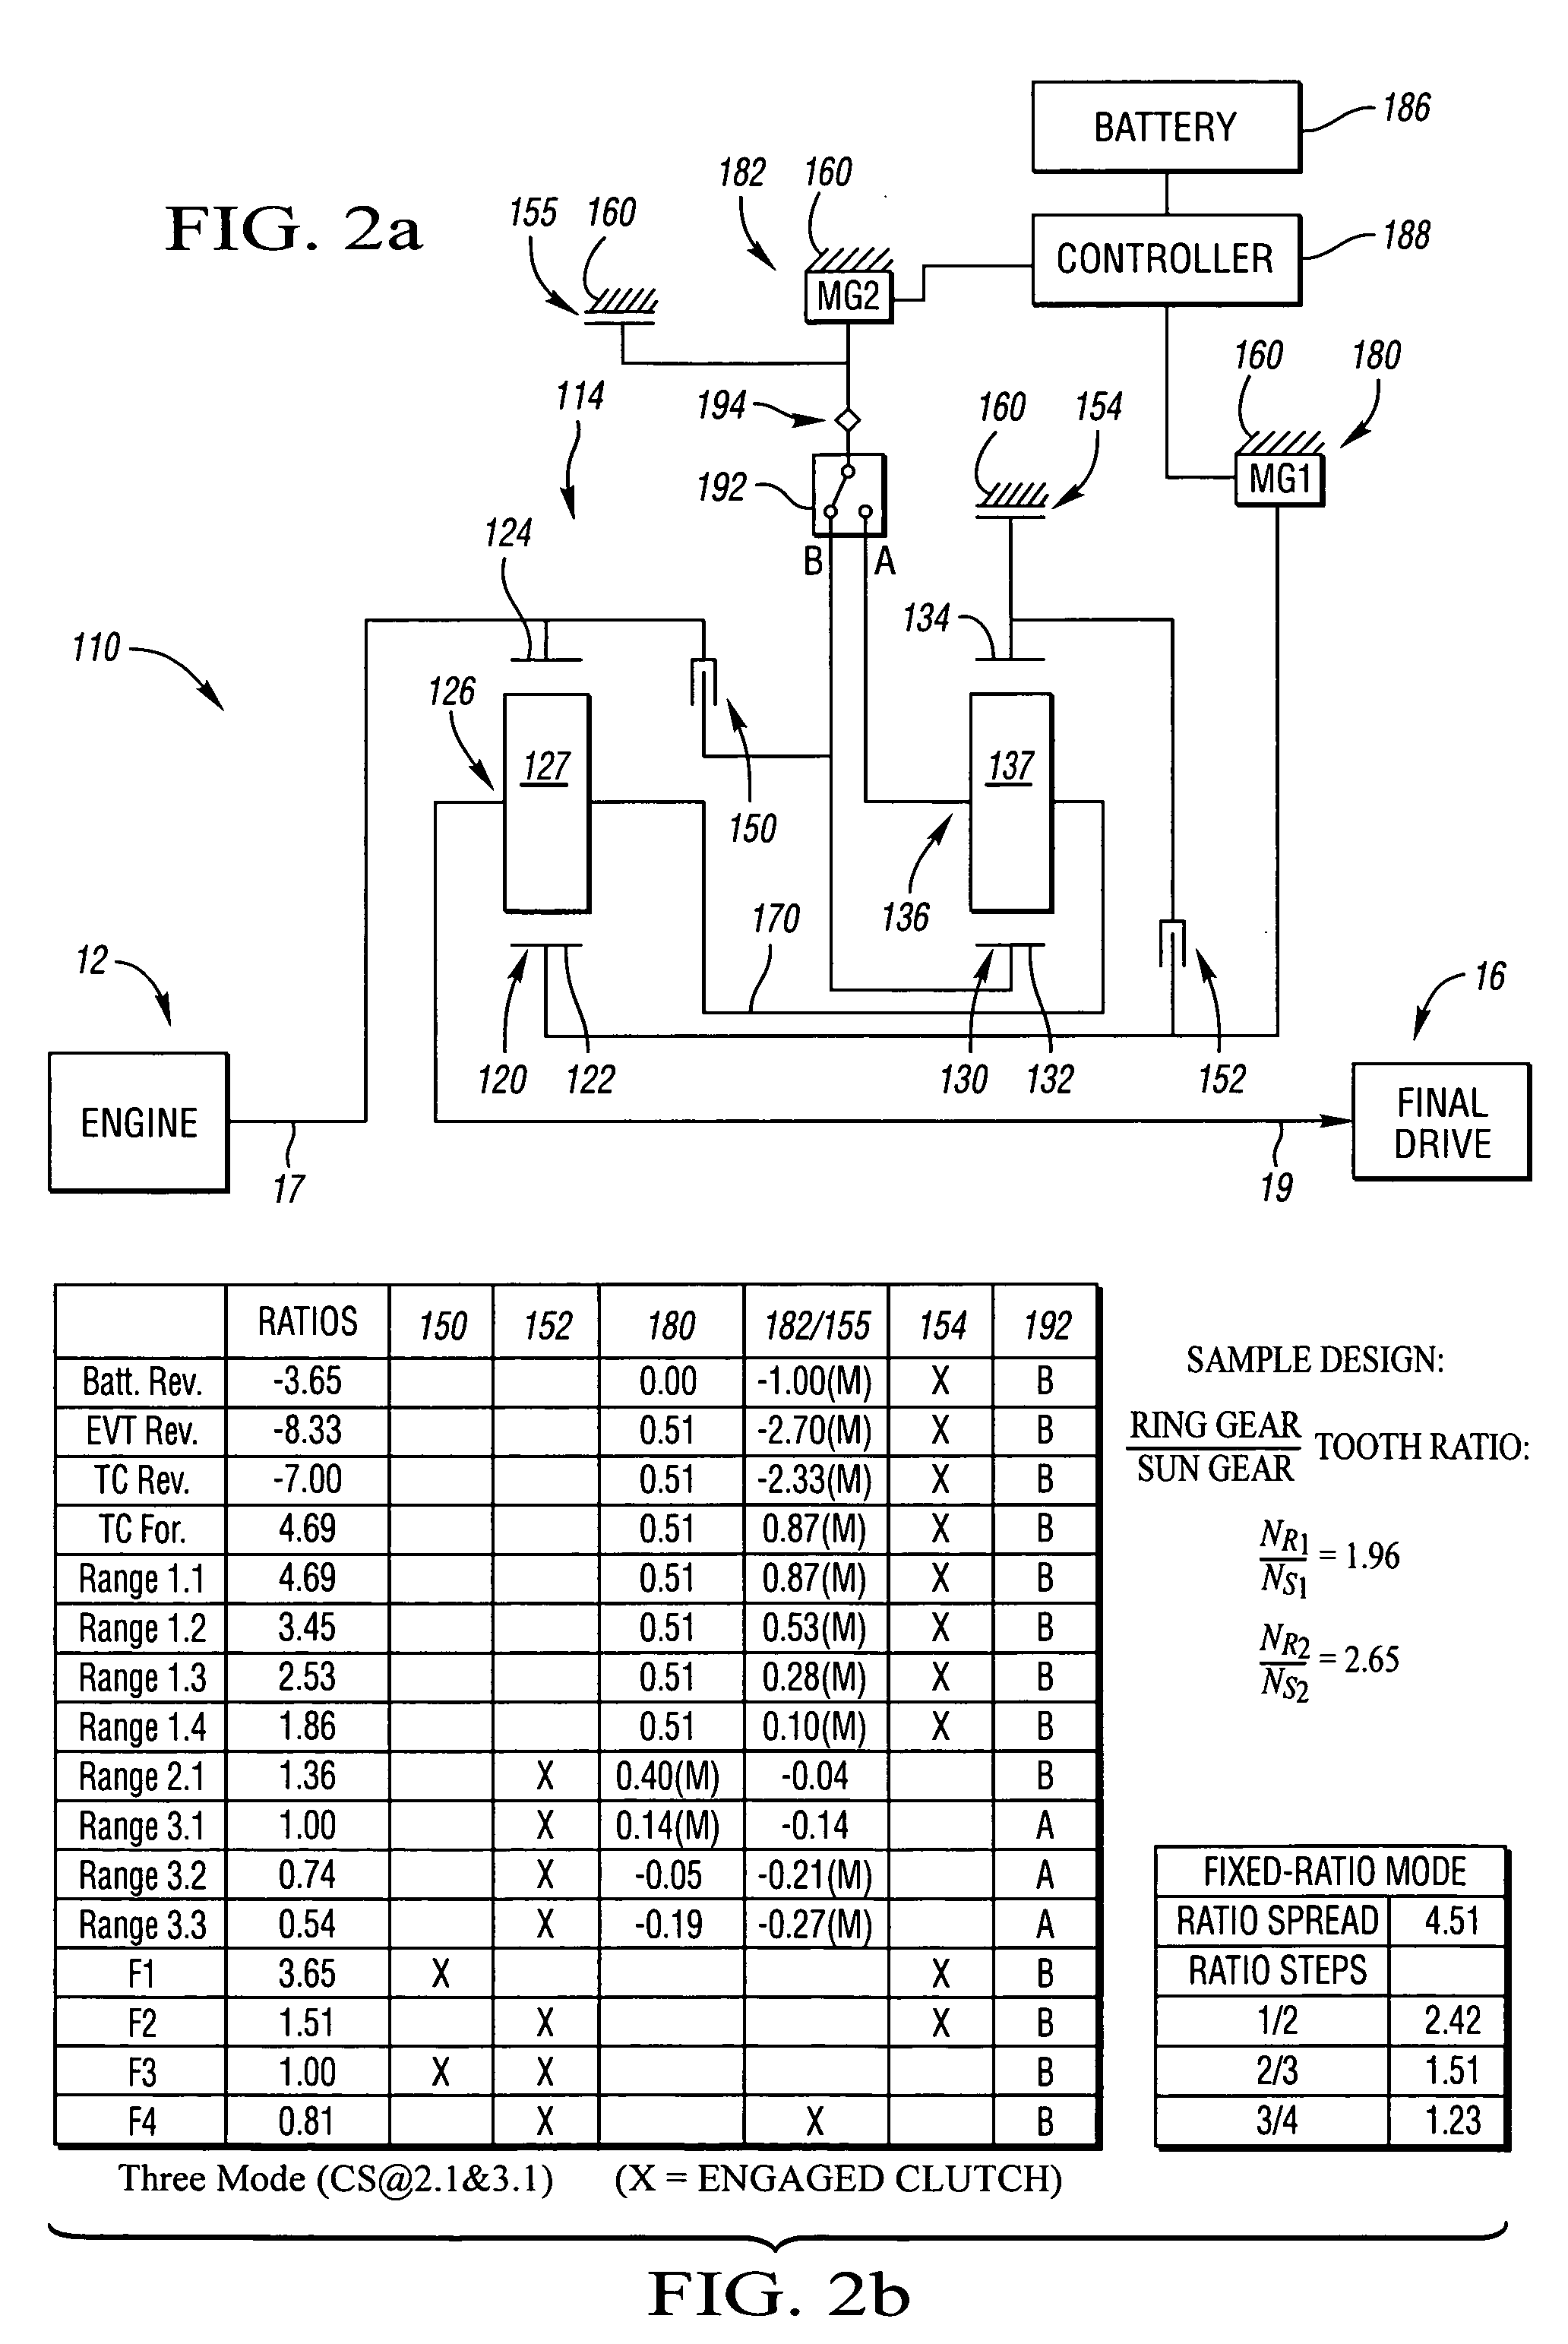 Multi-mode electrically variable transmissions having two planetary gear sets with one fixed interconnection